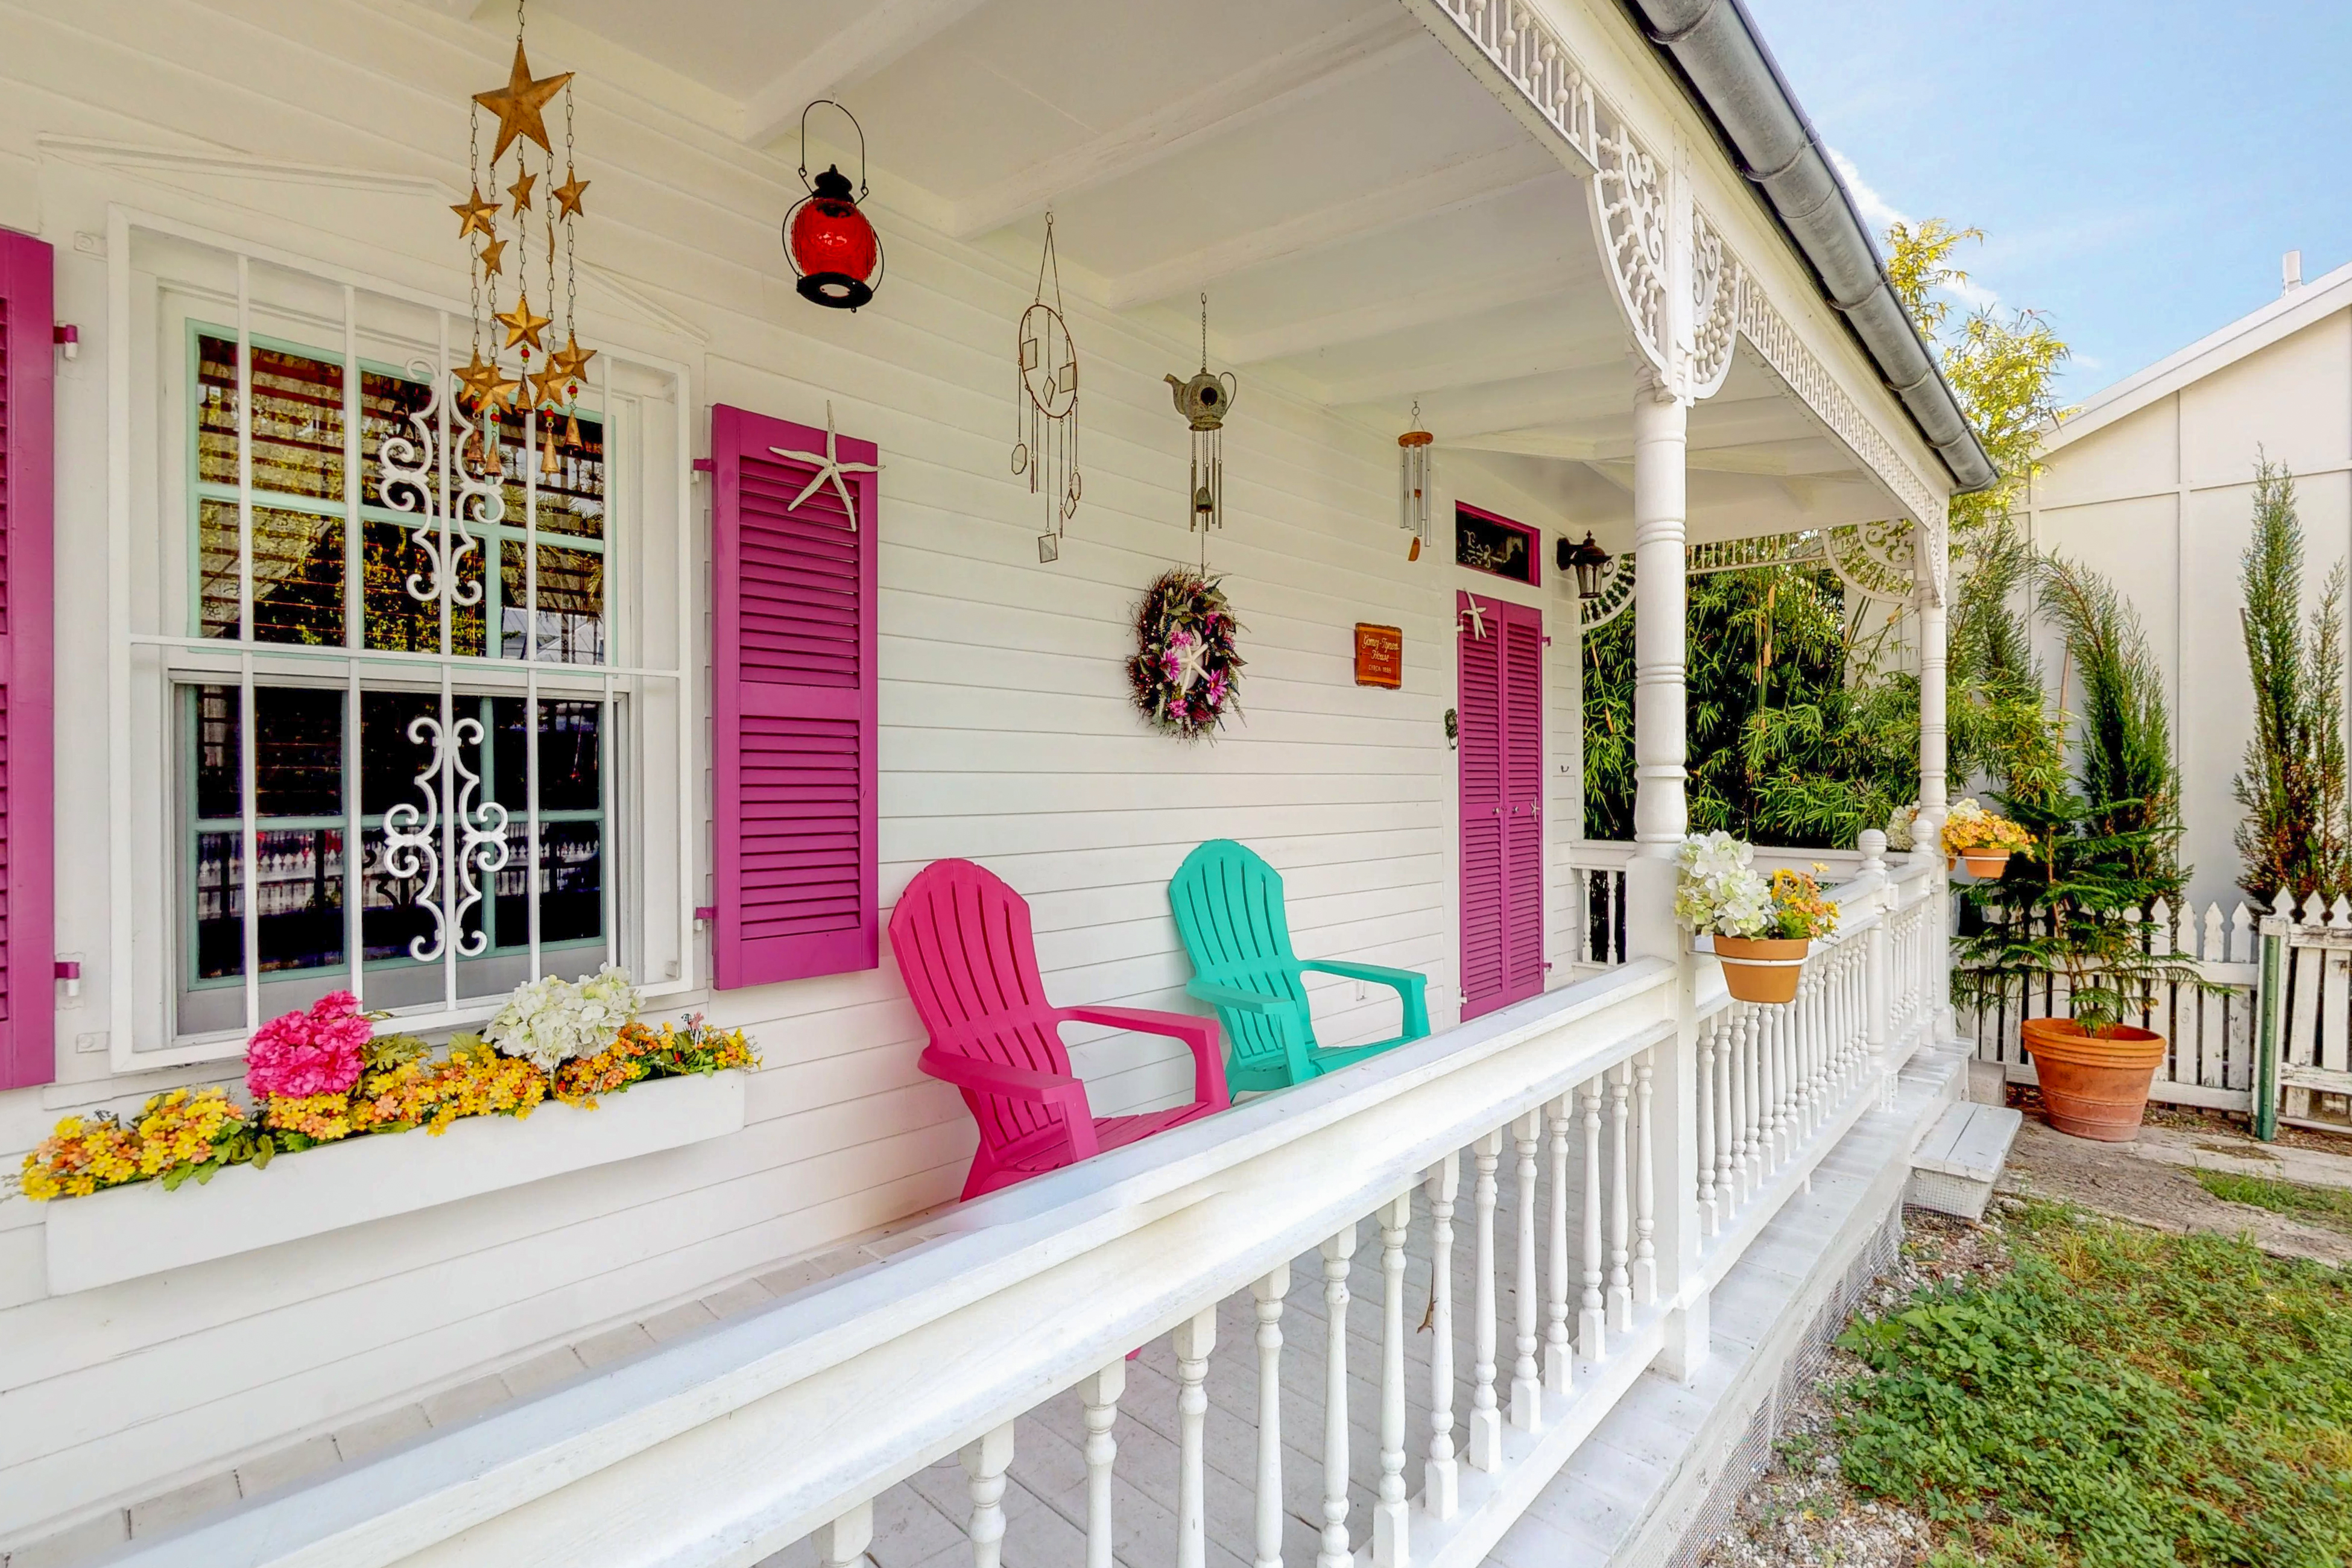 Gingerbread House / Cottage rental in Beach House Rentals Key West in Key West Florida - #22